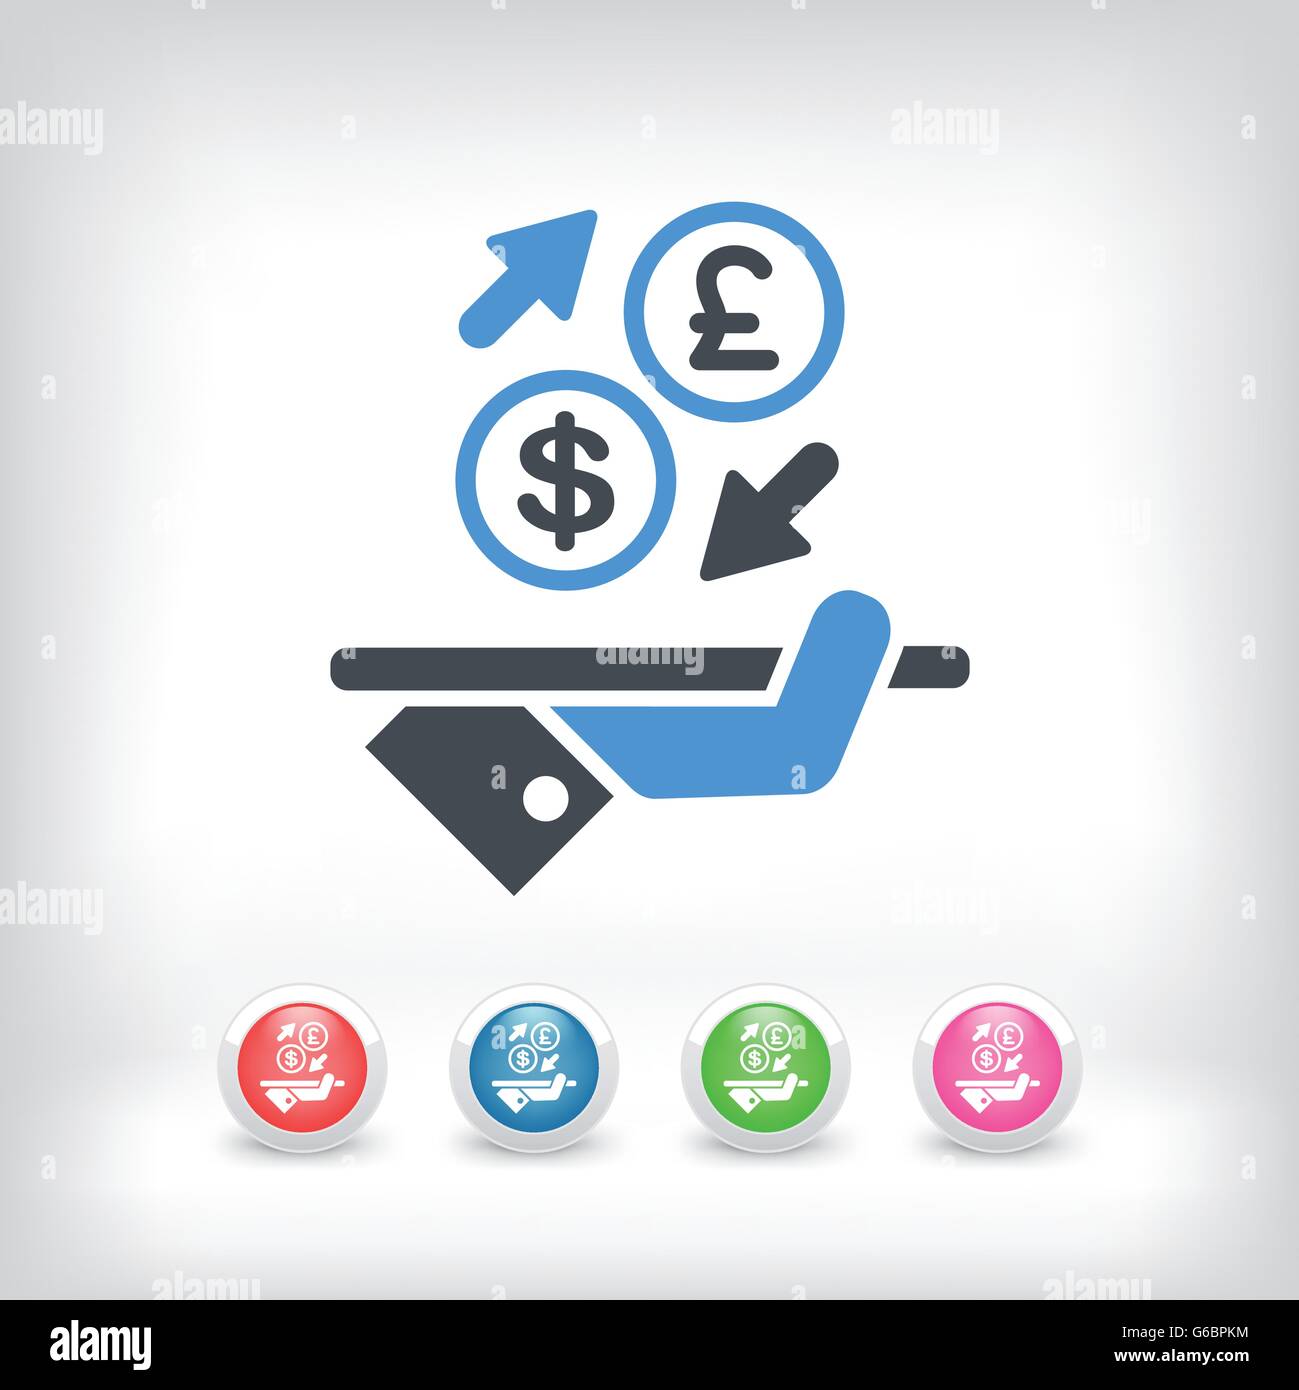 Dollar/Sterling - Foreign currency exchange icon Stock Vector